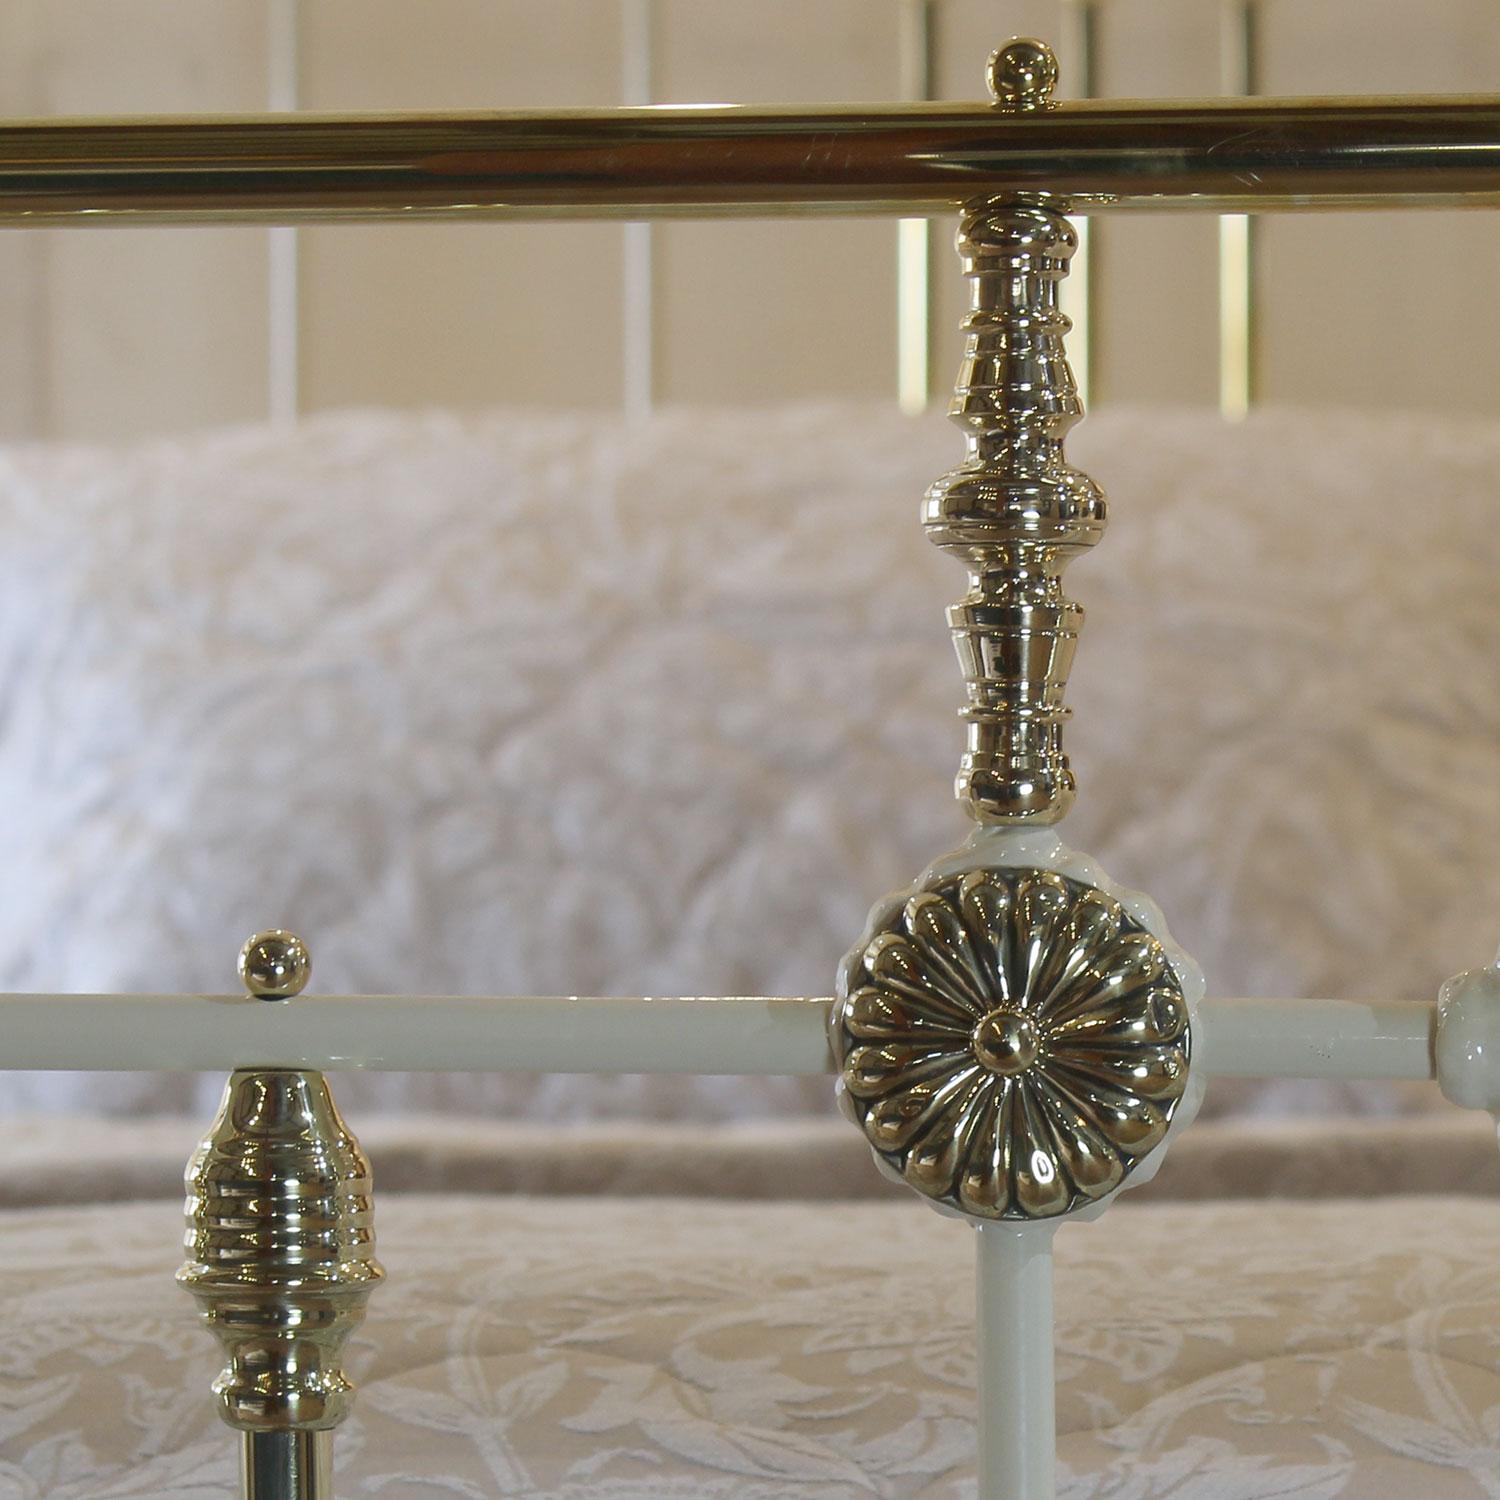 Late 19th Century Extra Wide Brass and Iron Antique Bed in Cream with Rosette Decoration, MSK81 For Sale